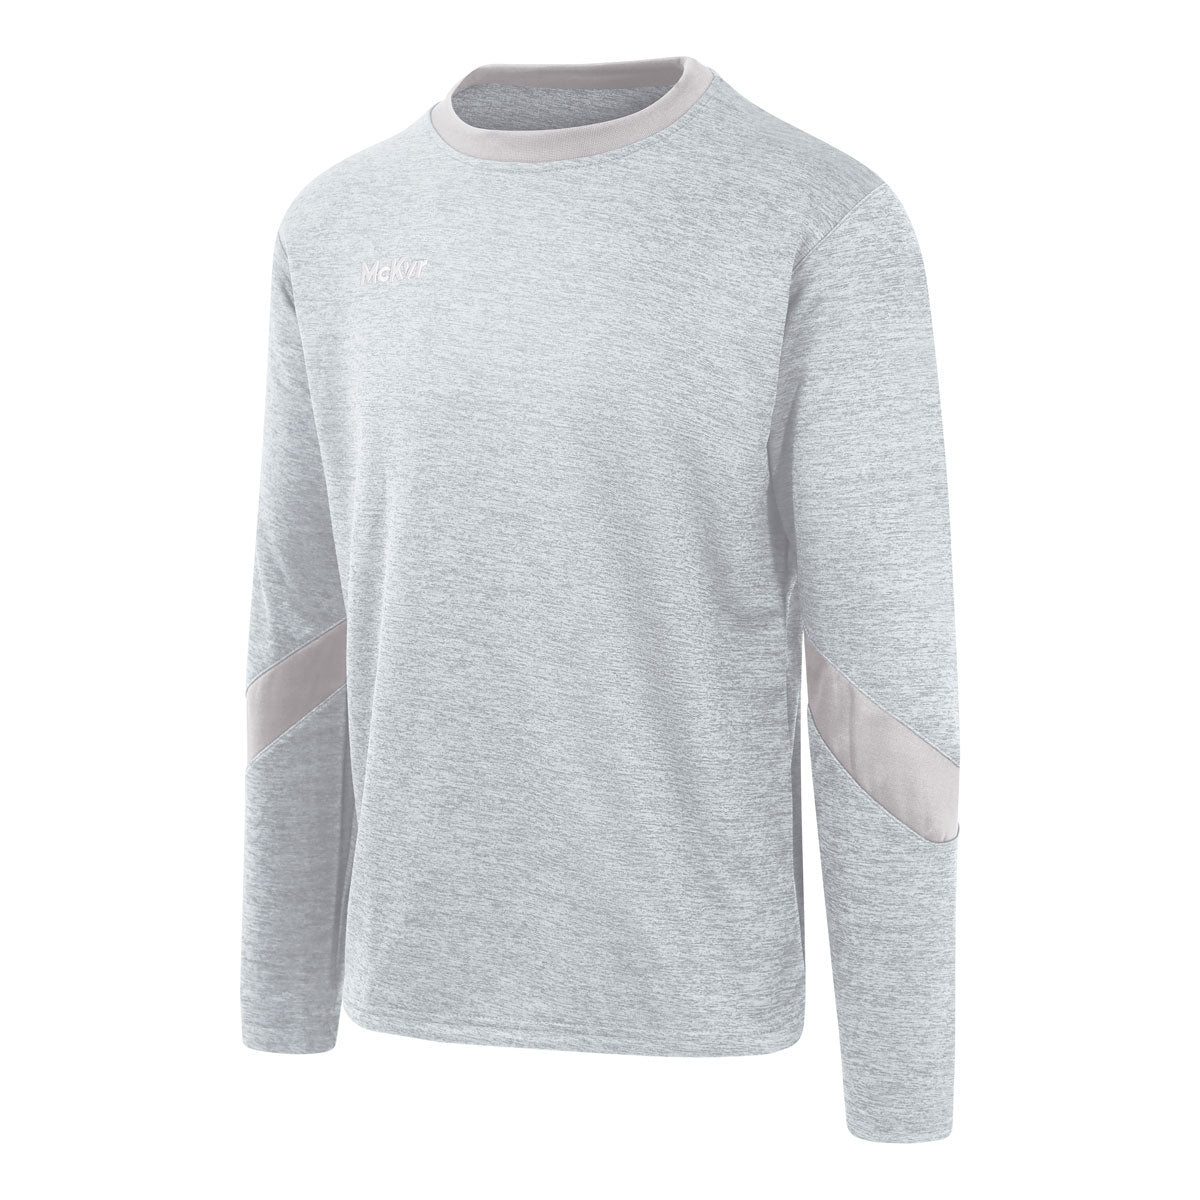 Mc Keever Core 22 Sweat Top - Youth - Grey